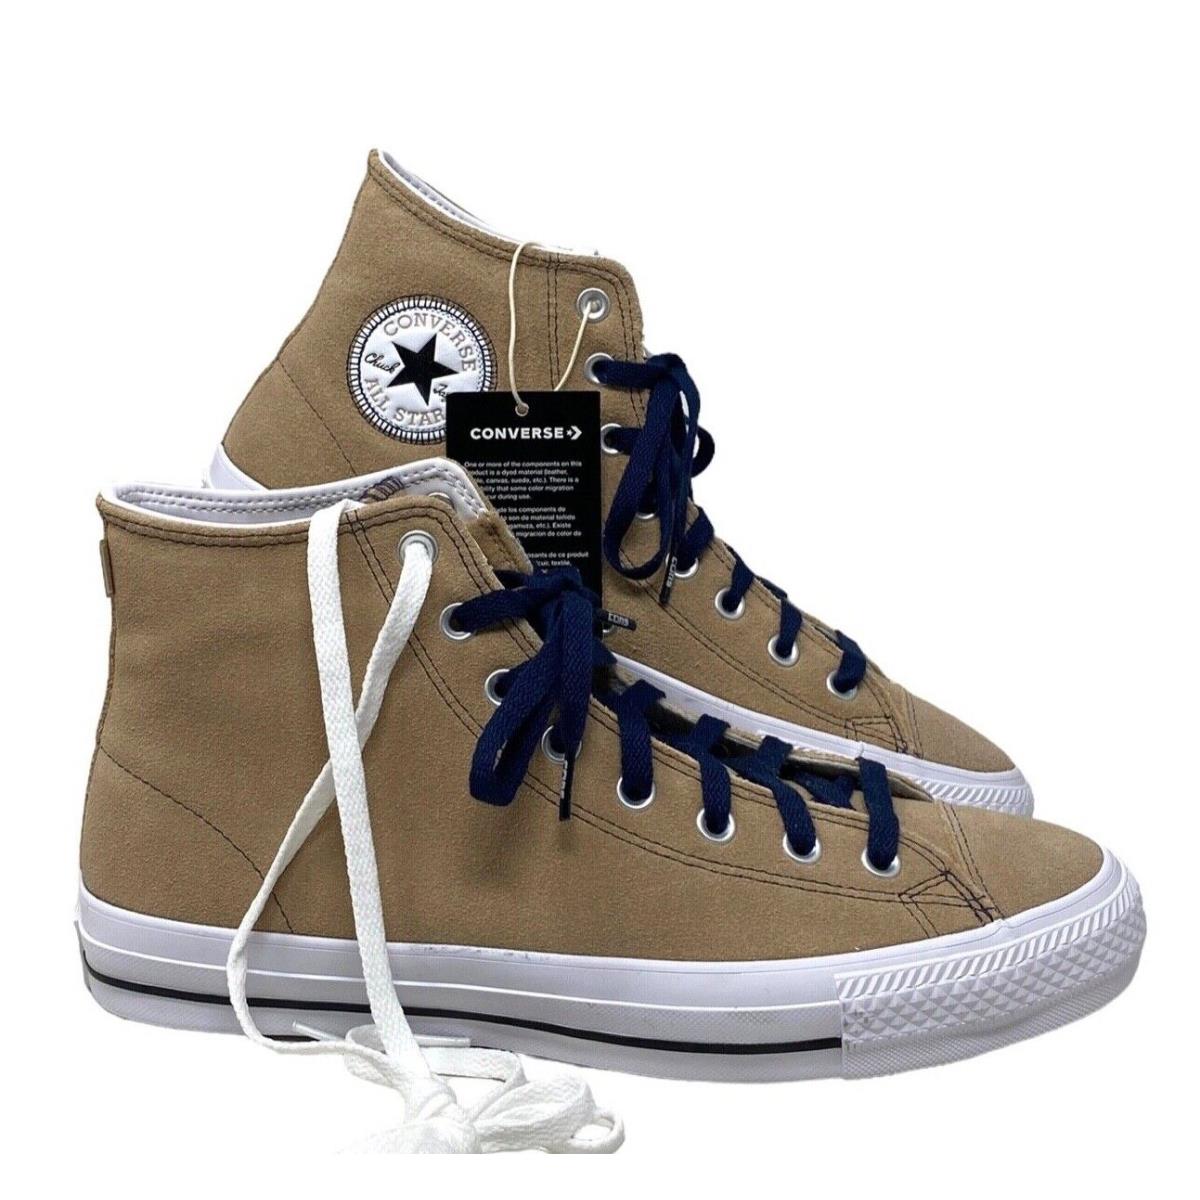 Converse Cons Pro High Top Suede Shoes Men Size Cream White Sneakers 172631C